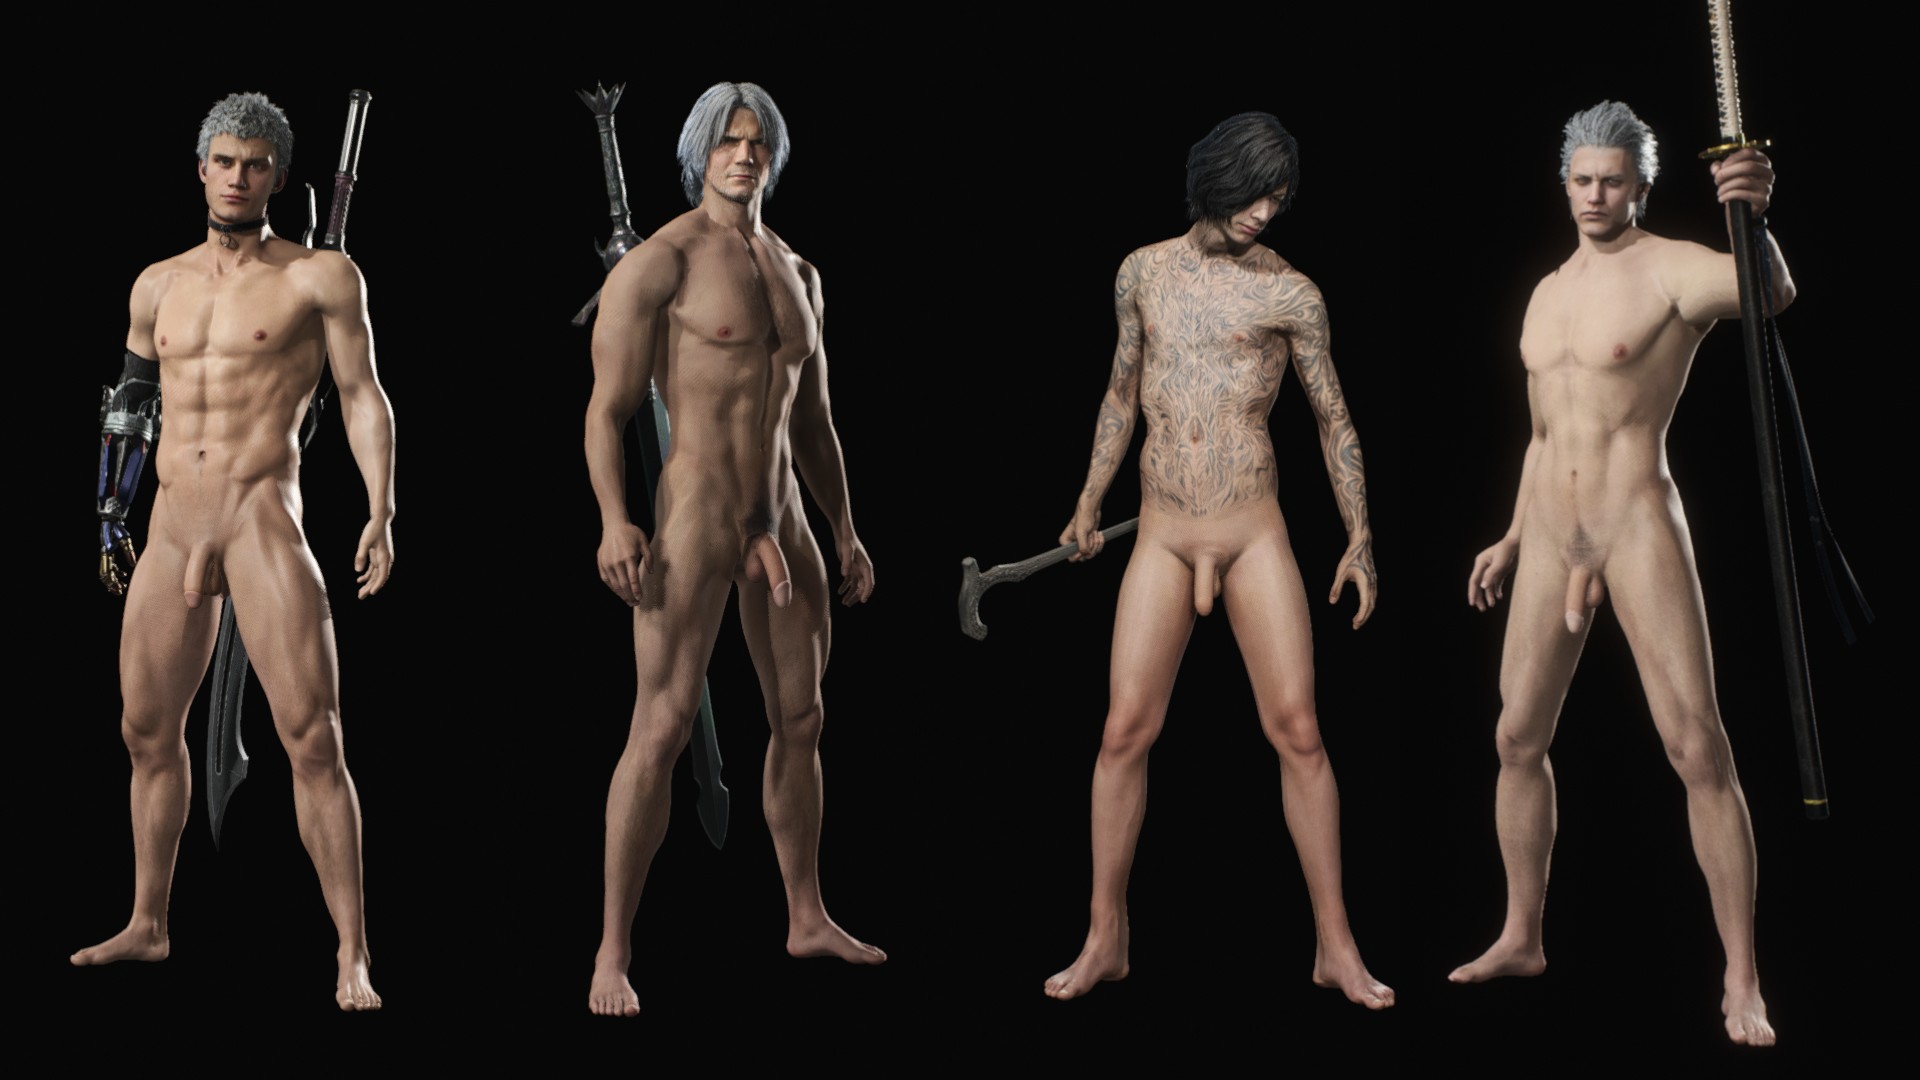 Devil may cry nude mod